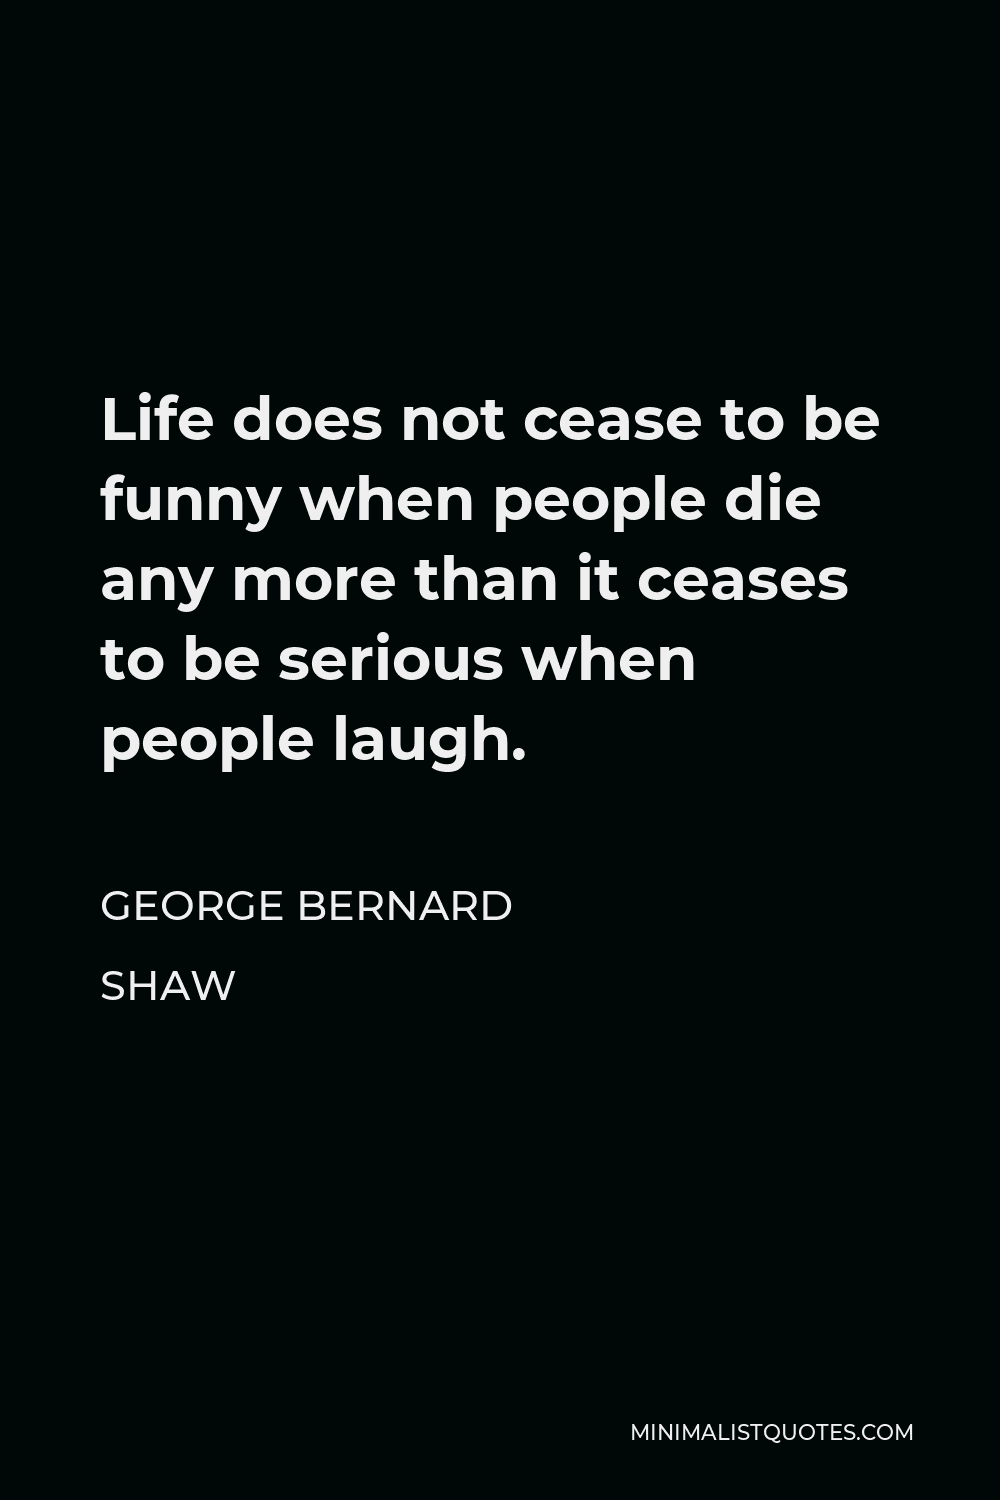 George Bernard Shaw Quote - Life does not cease to be funny when people die any more than it ceases to be serious when people laugh.